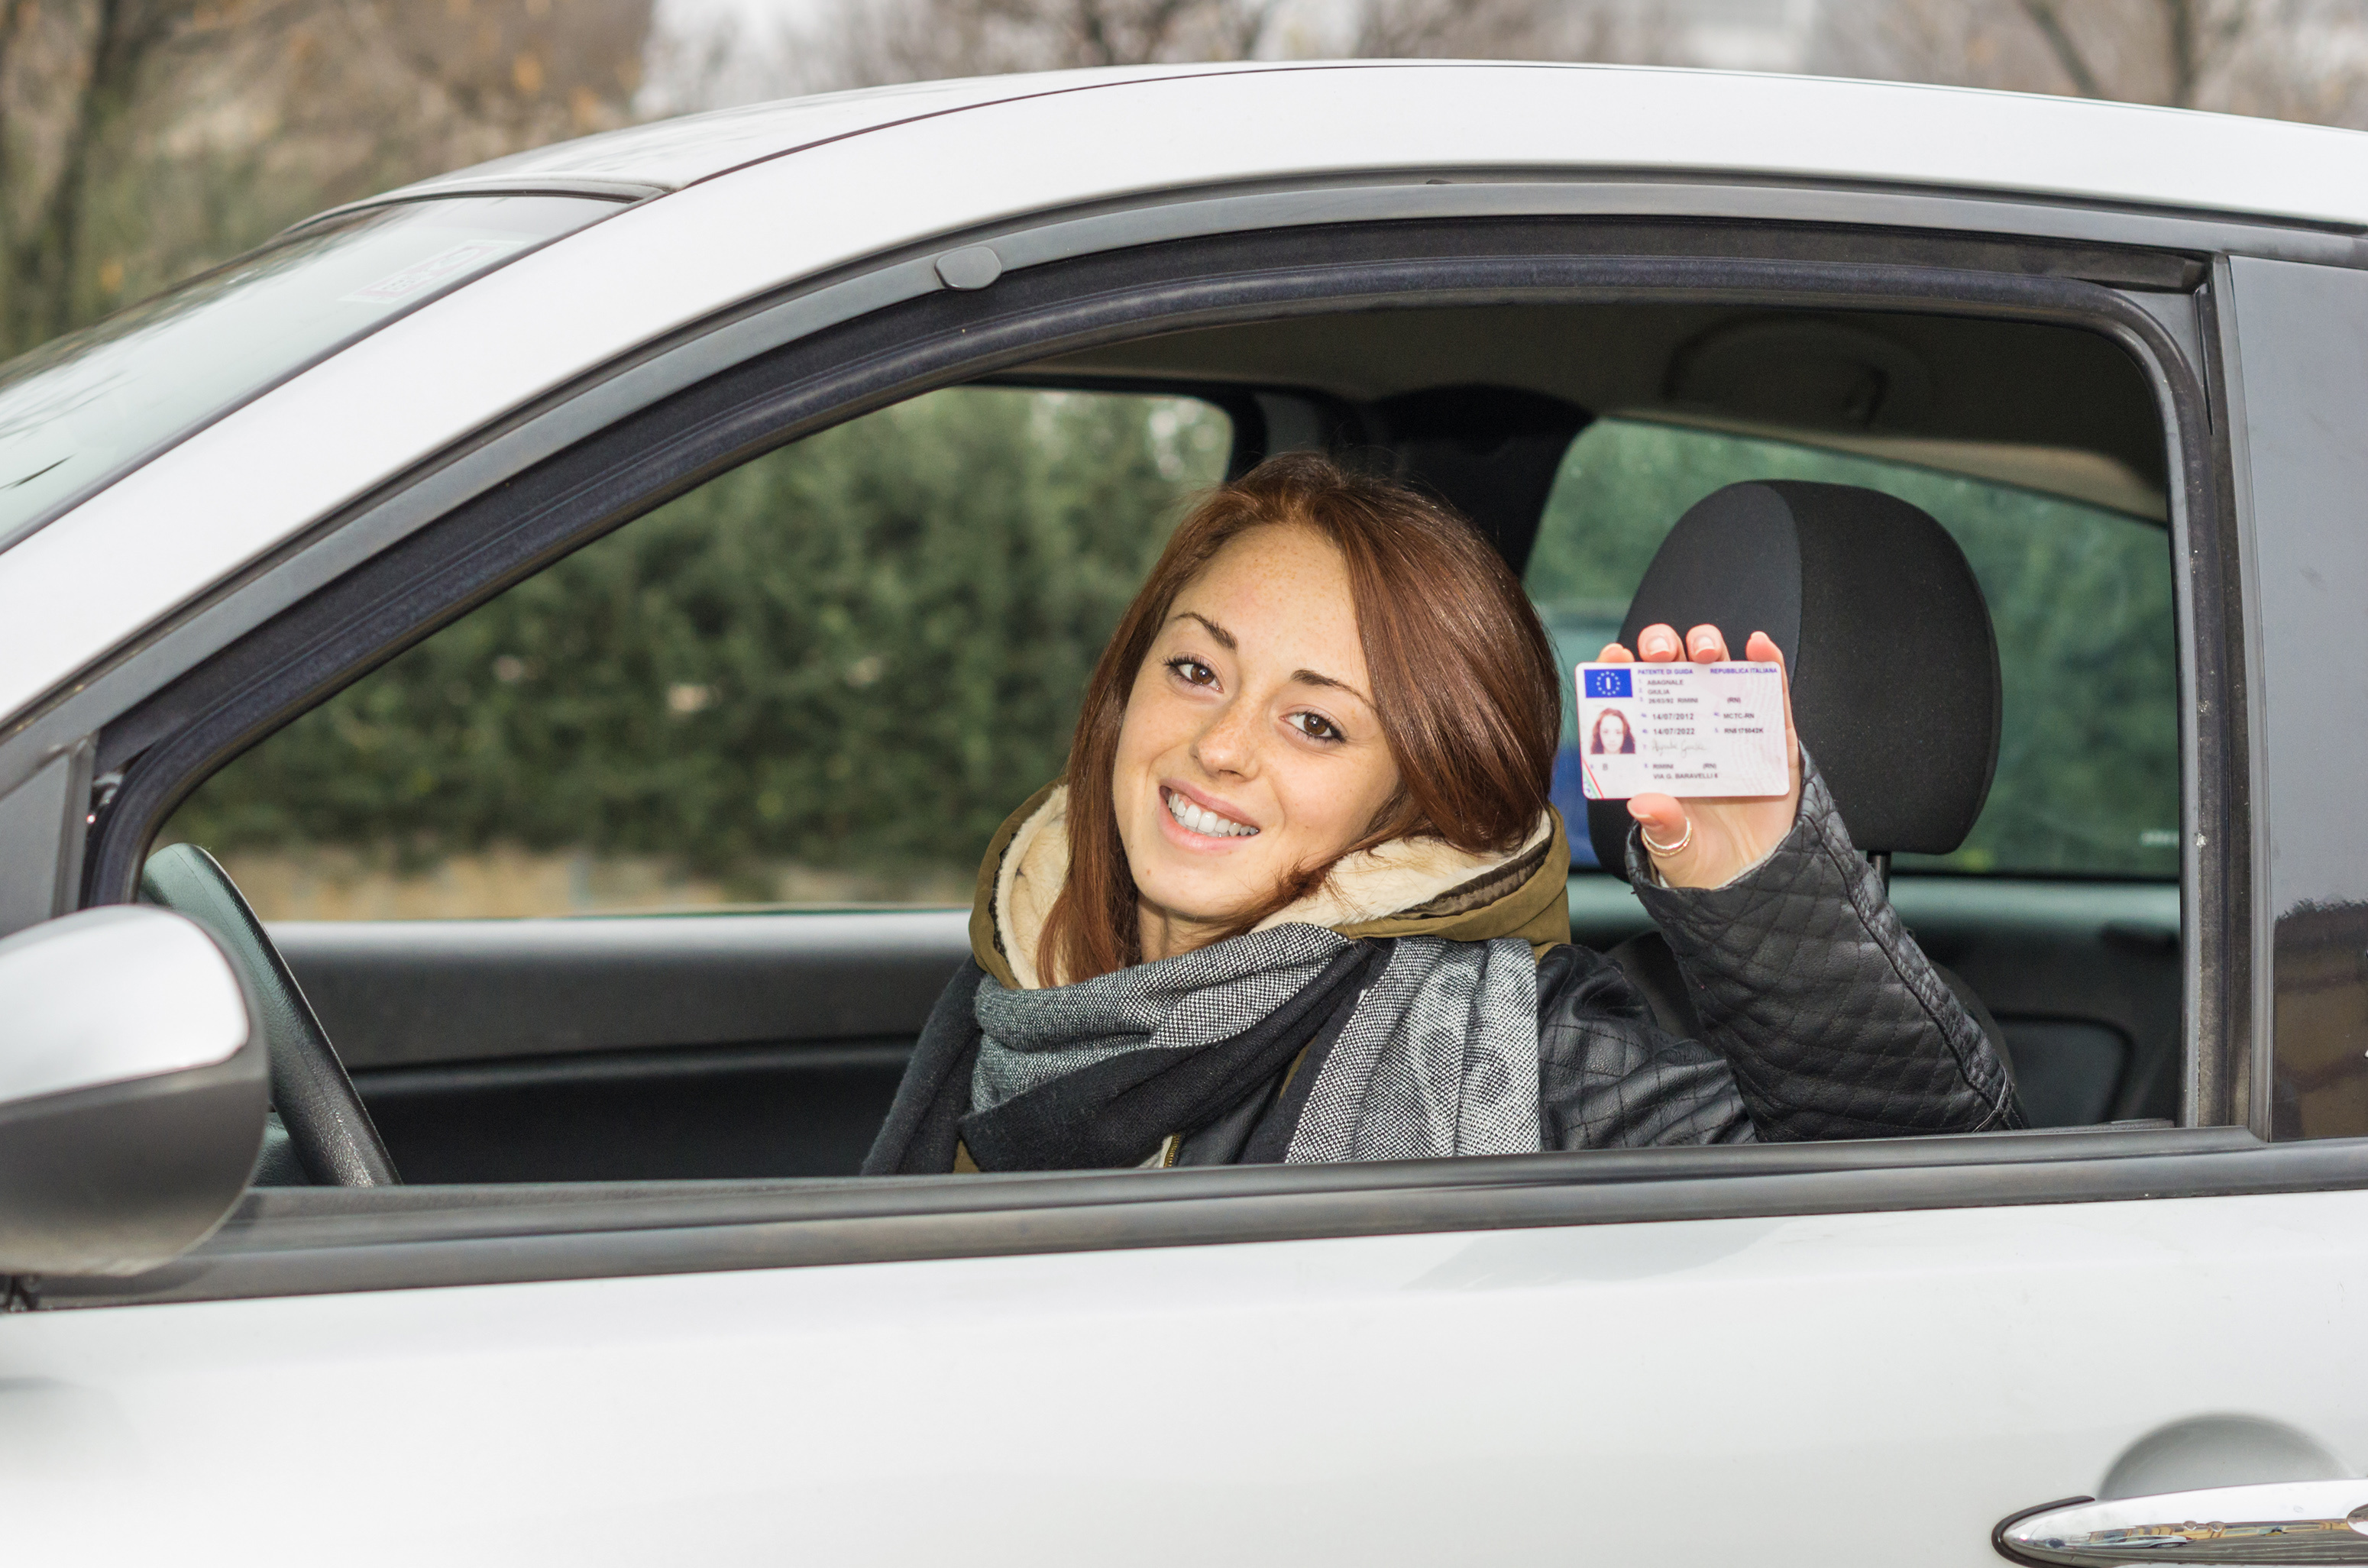 girl in the car smiling happy showing her driver's license - caucasian people